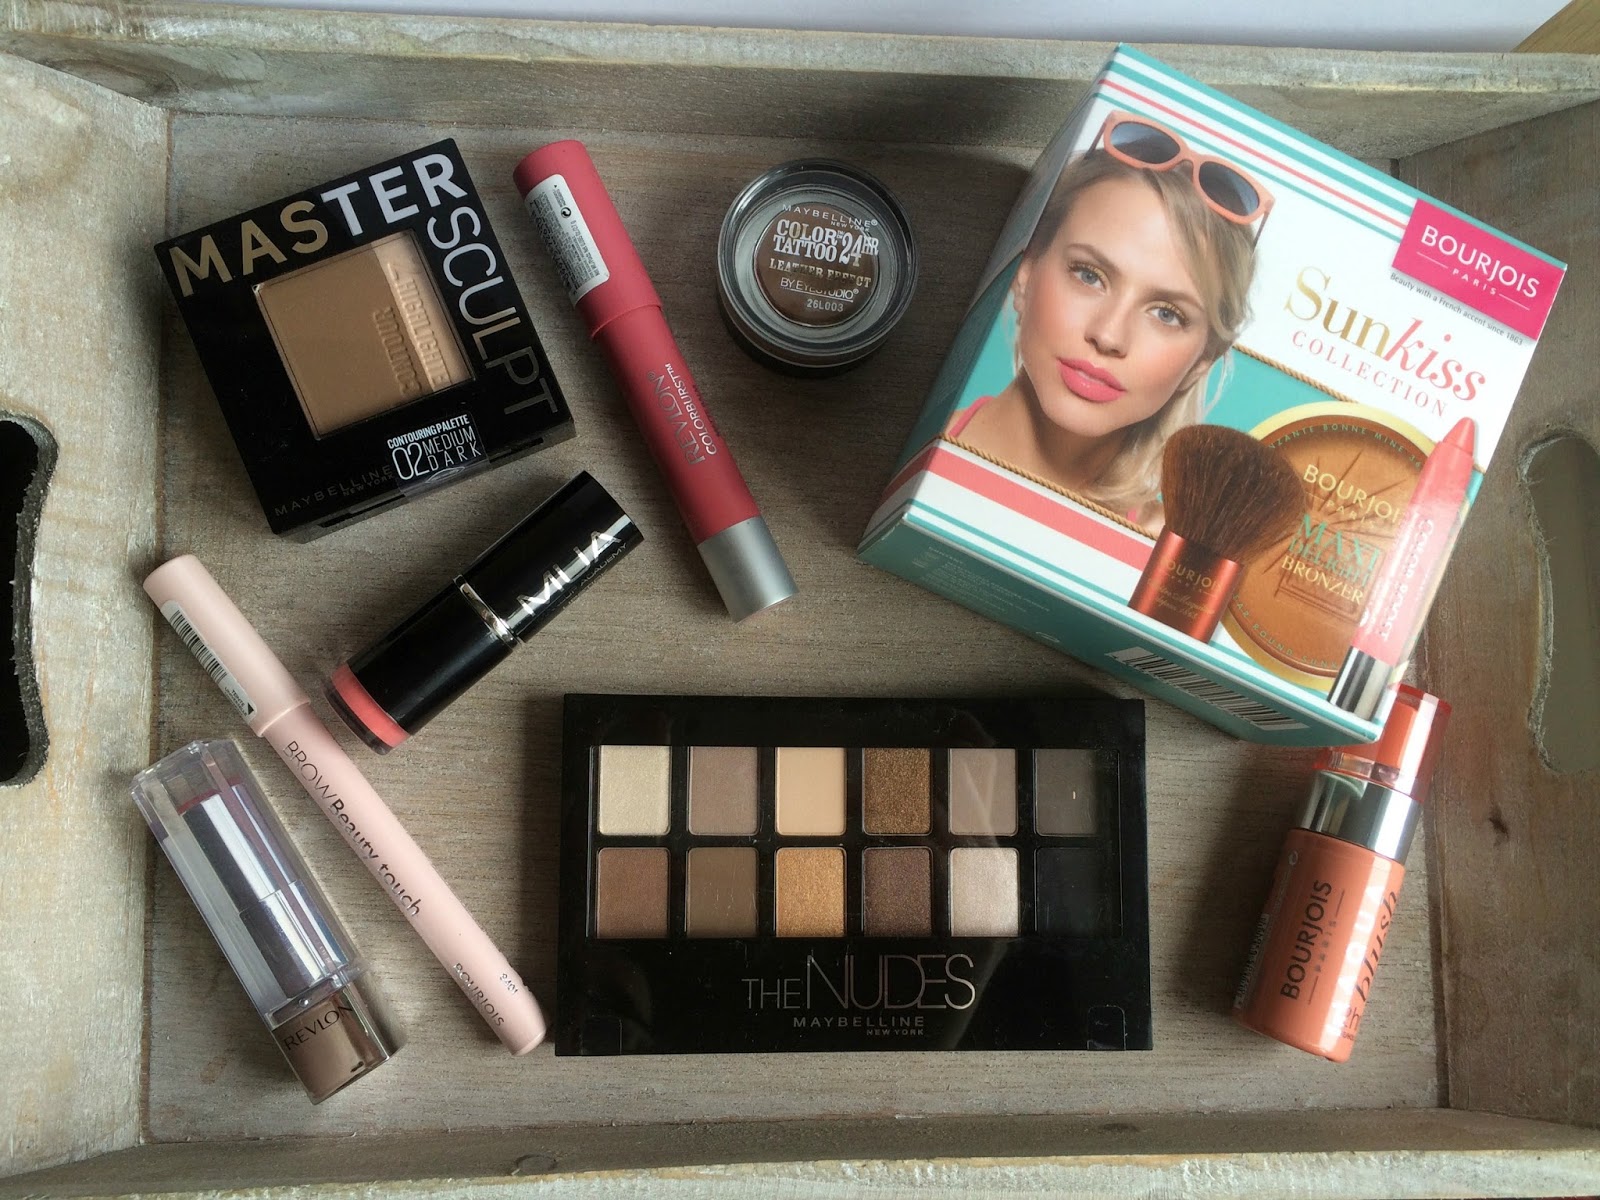 Boots and Superdrug Haul #2 June 2015